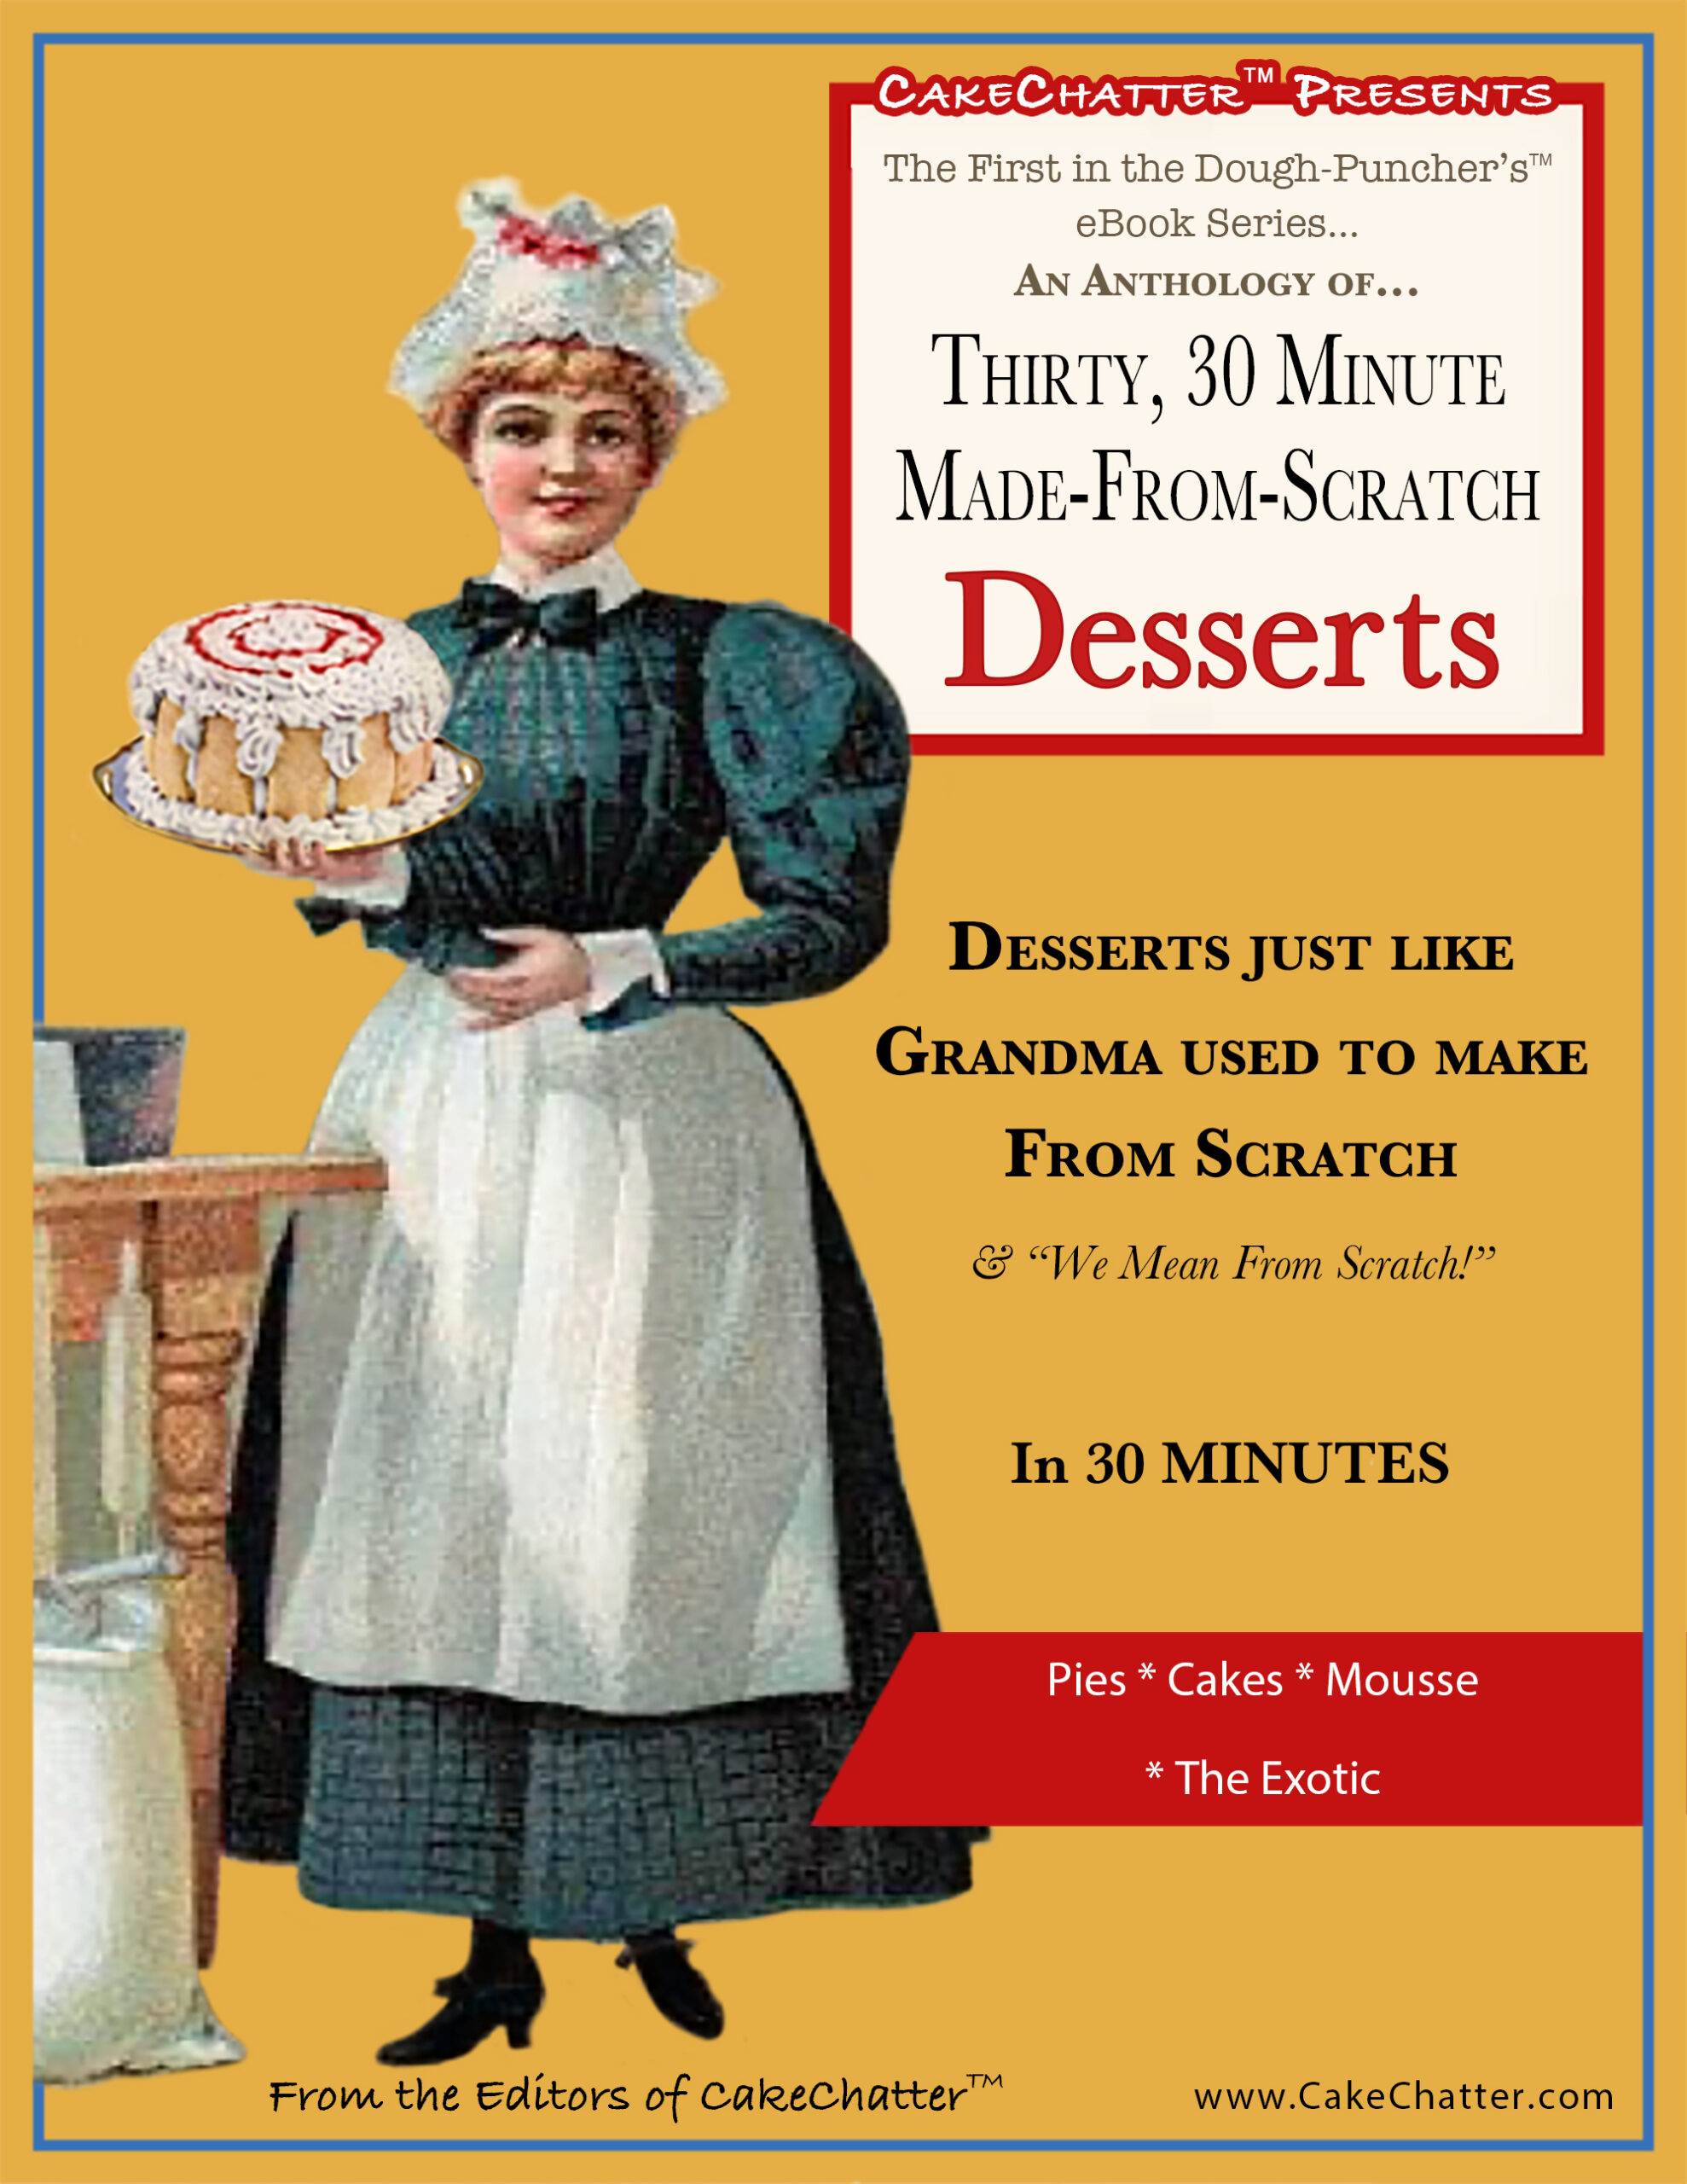 FREE: An Anthology of Thirty, 30 Minute Made-From-Scratch Desserts: Desserts just like Grandma used to make… by Editors of CakeChatter